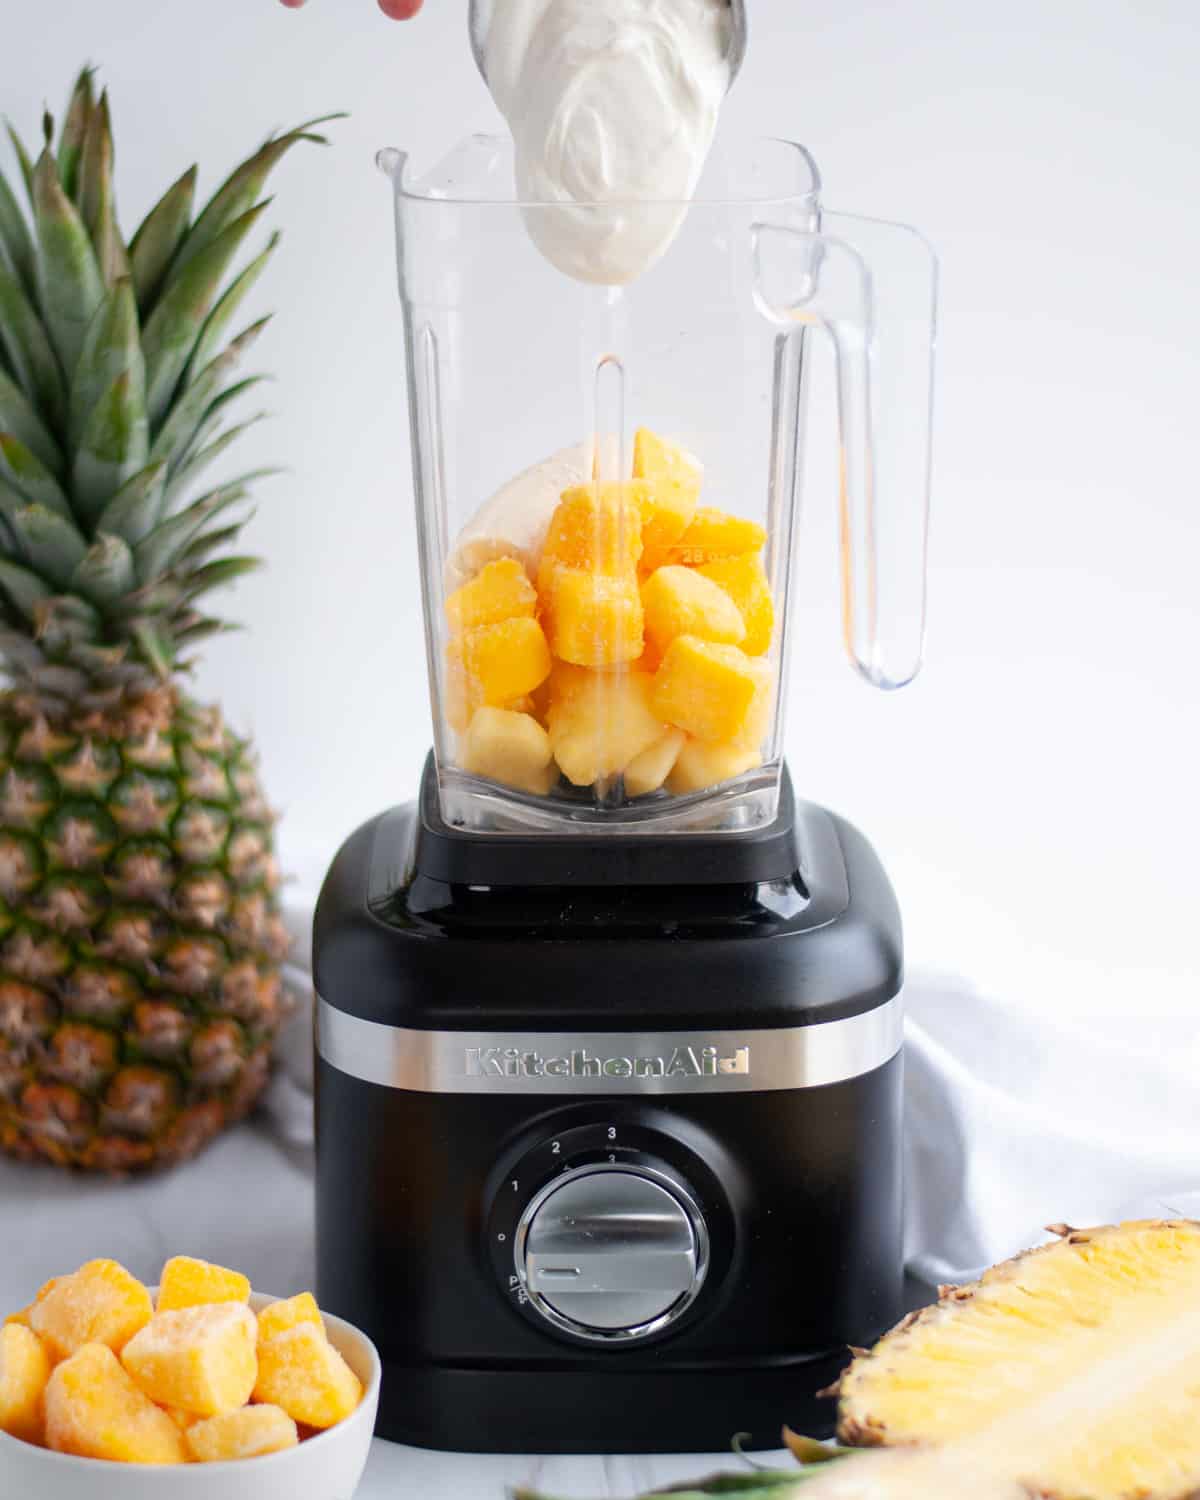 process shot showing how to make a mango pineapple smoothie, showing ingredients being added to a blender.